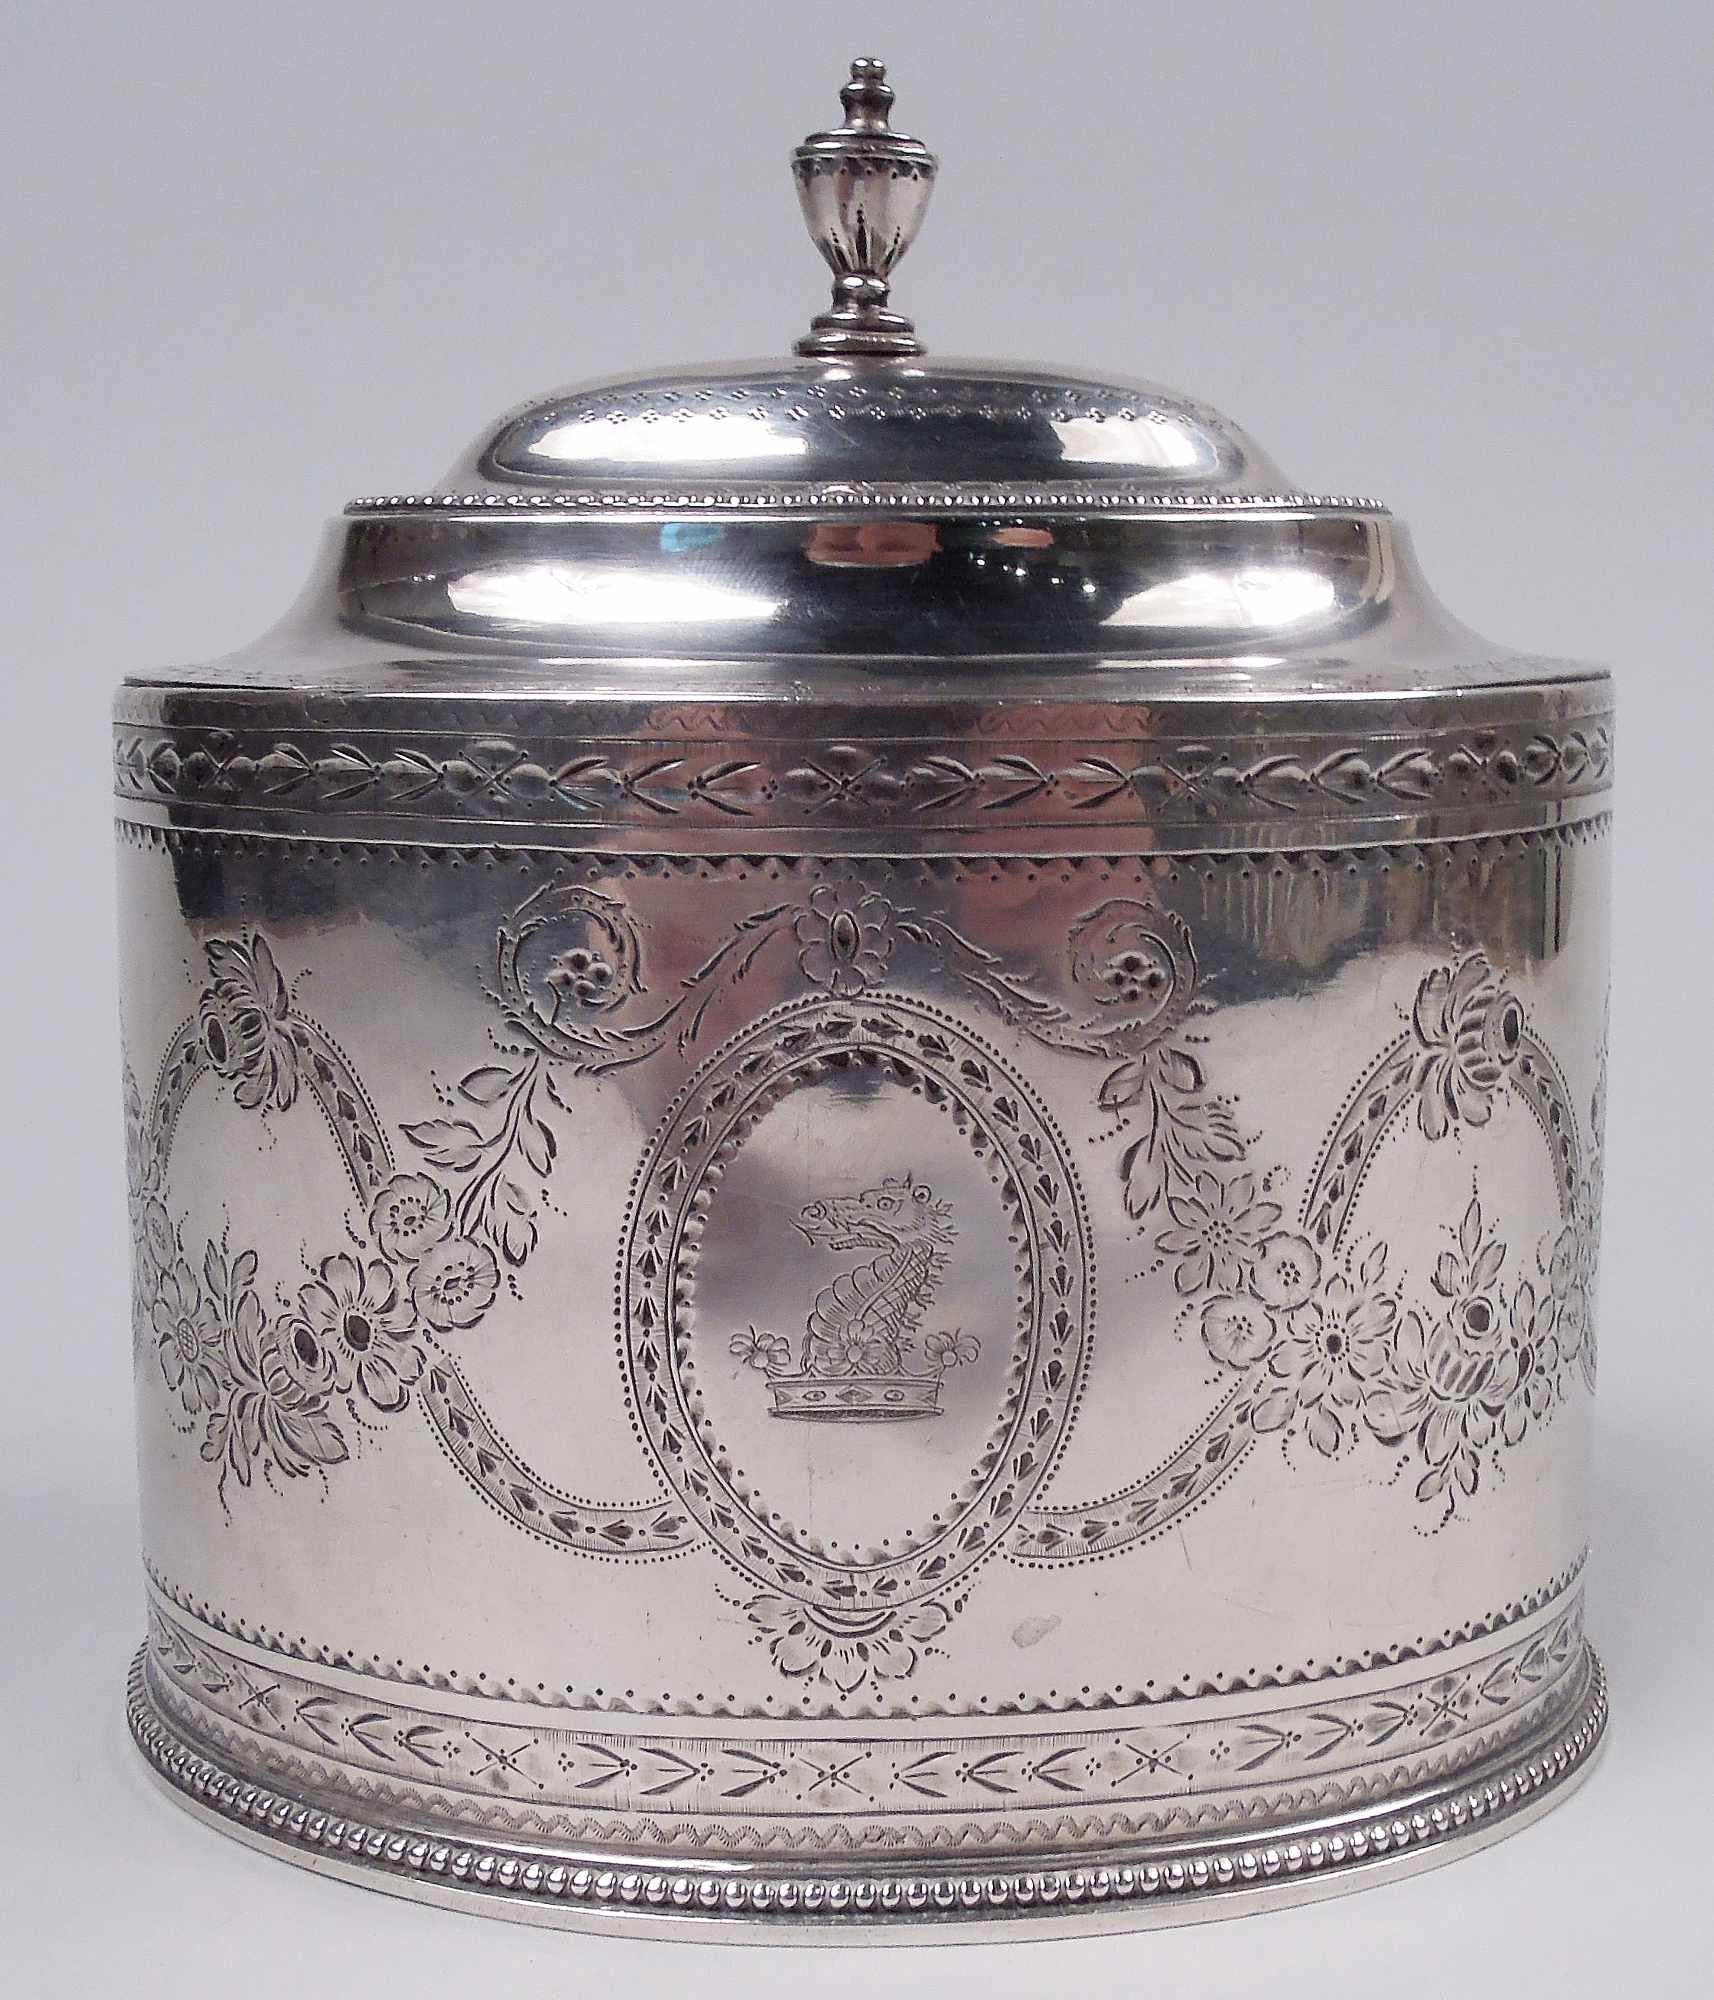 George III sterling silver tea caddy. Made by Hester Bateman in London in 1782. Straight oval bowl; cover domed with cast vasiform finial. Engraved garland and swag and ornamental borders. Beading. Beautiful Neoclassicism for a special blend. Fully